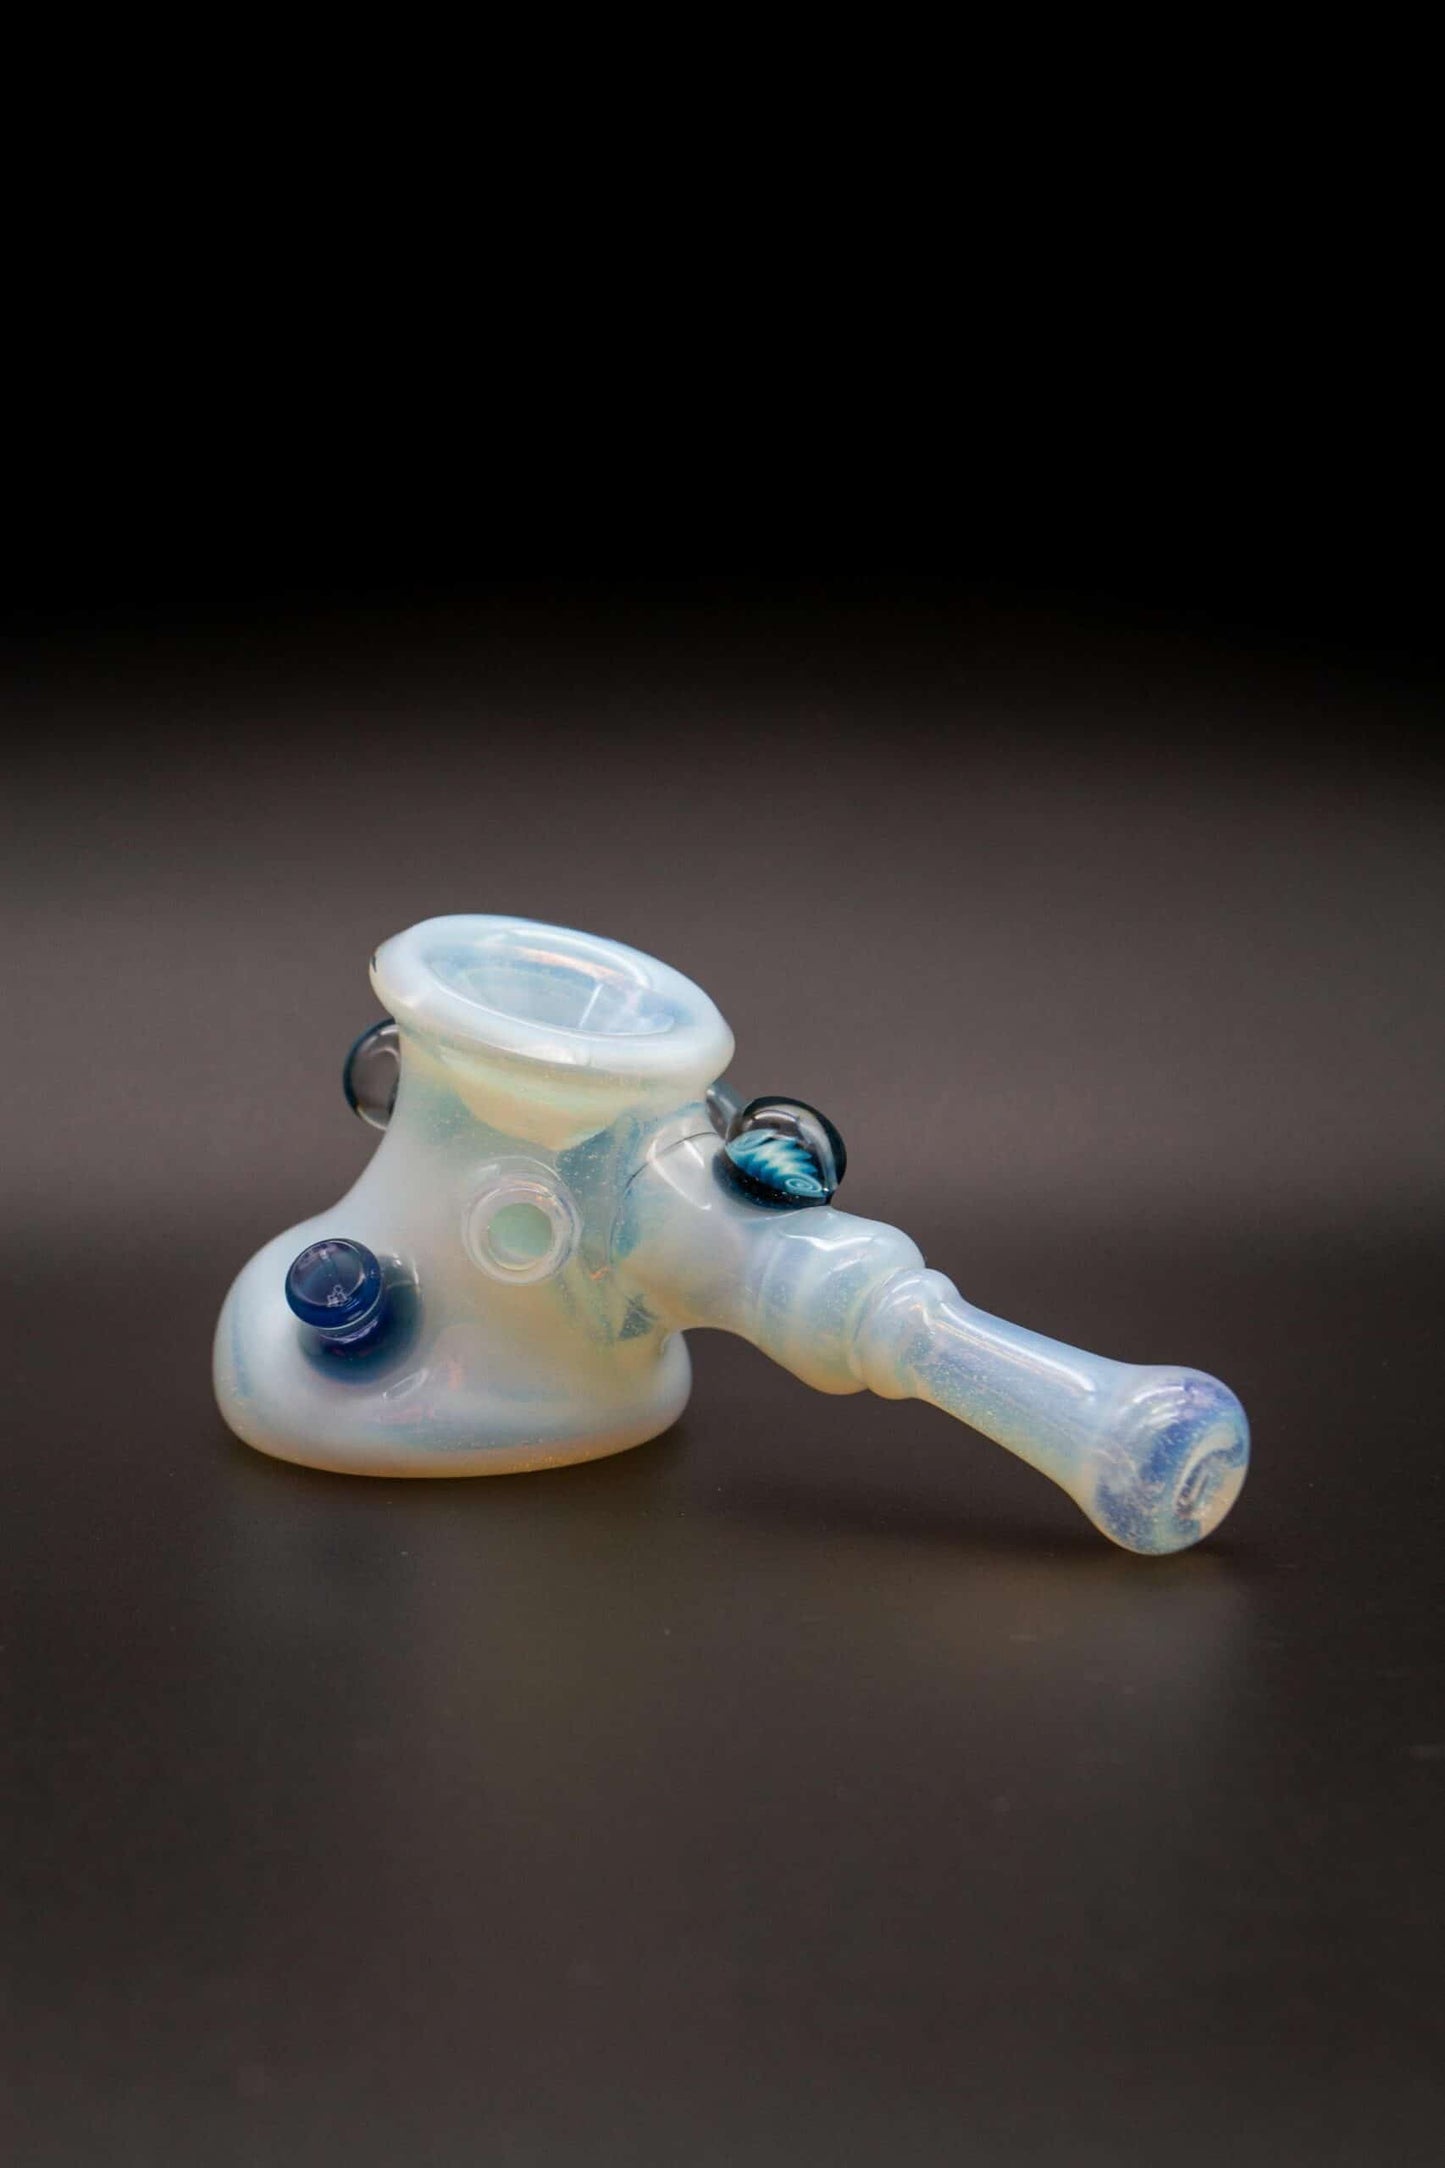 meticulously crafted art piece - Whiteout Dry Hammer by Chaka Glass